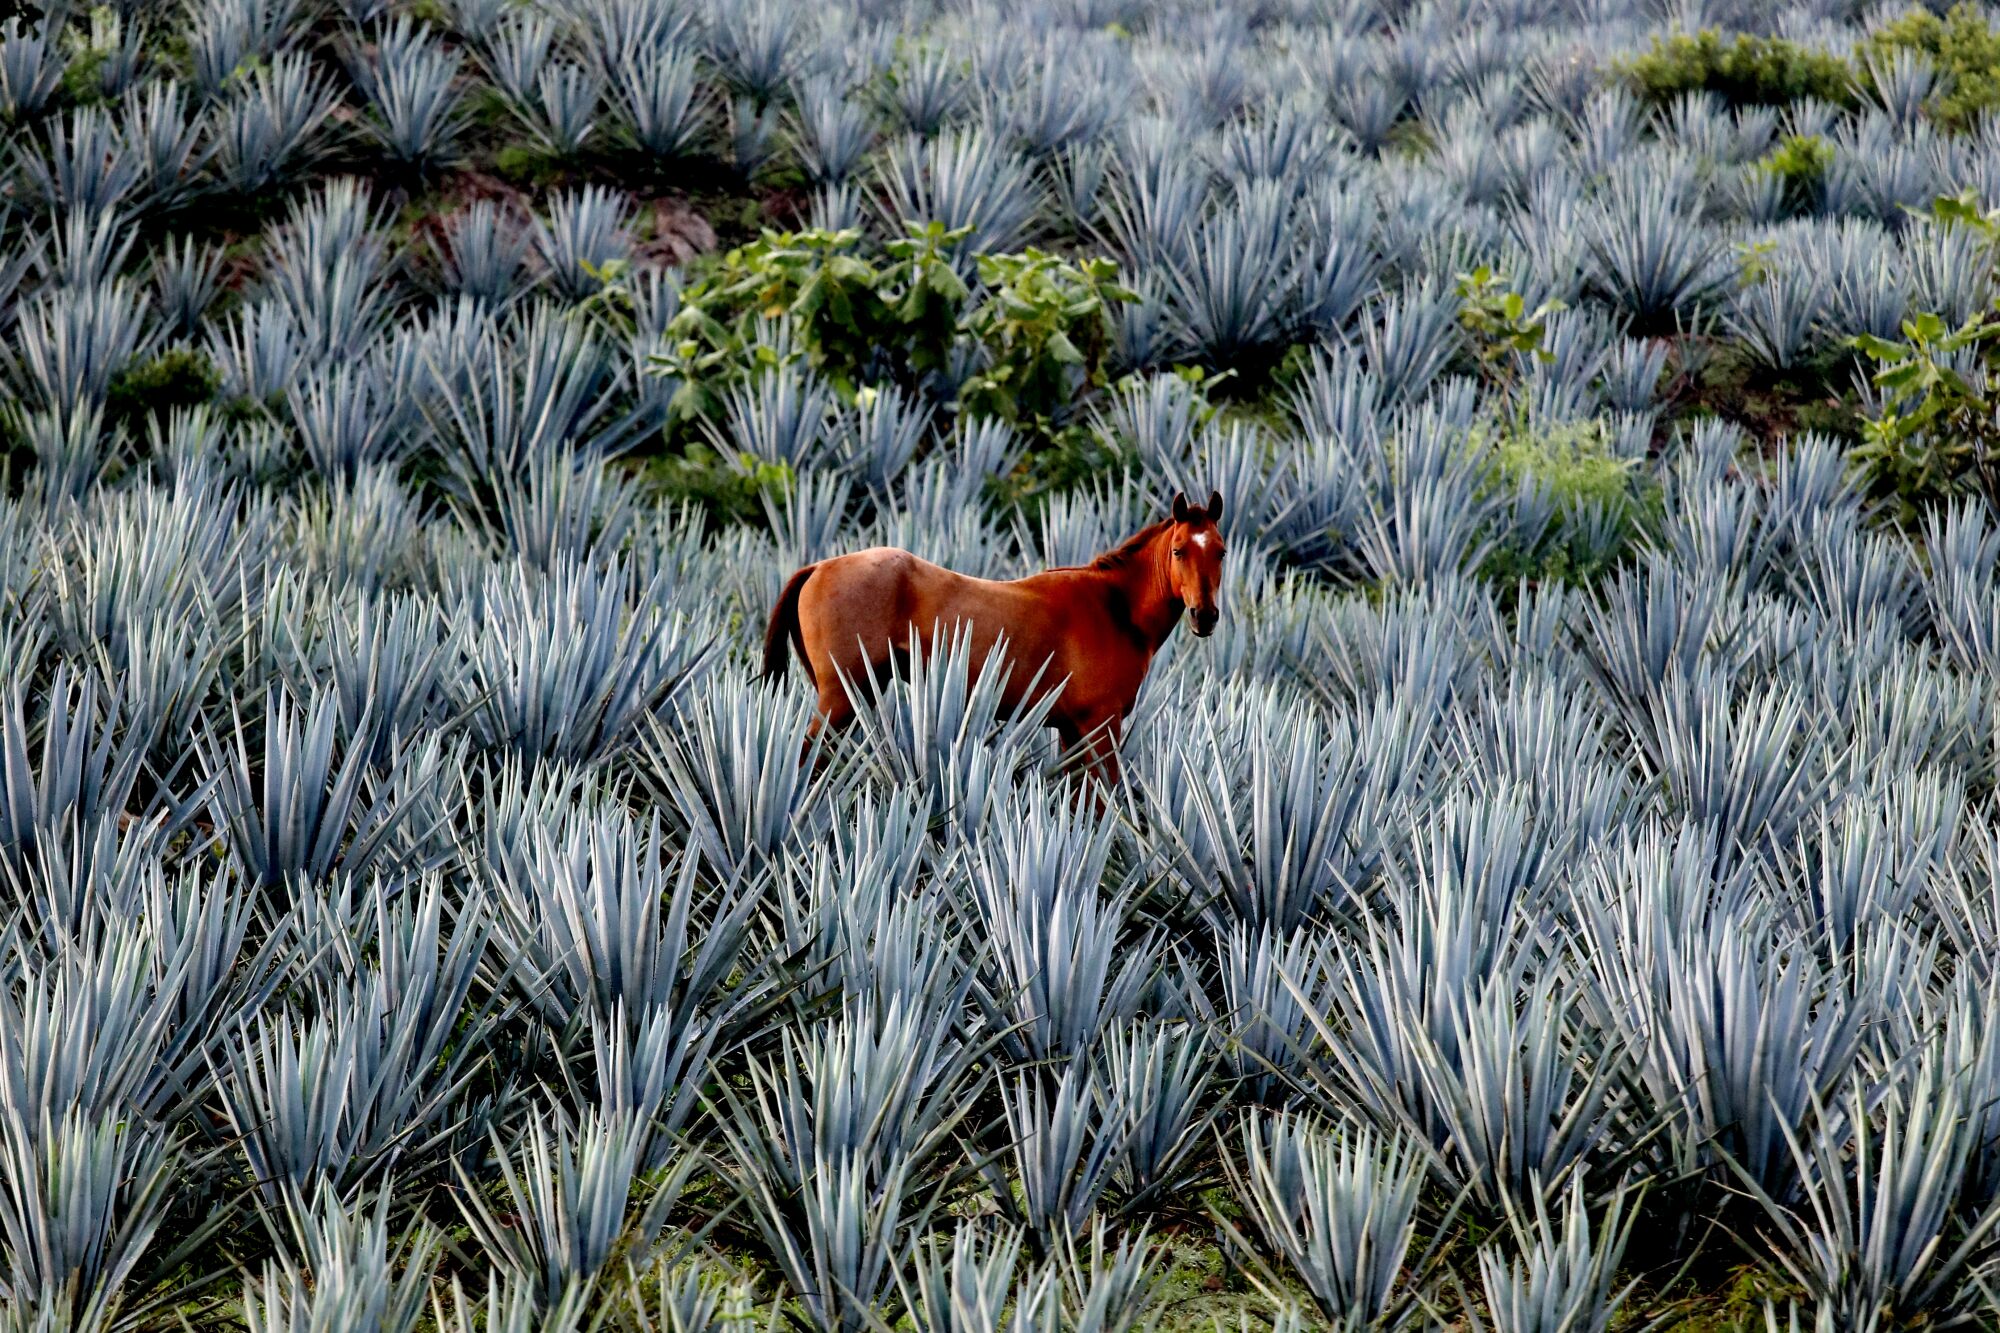 A horse grazes in a blue agave field